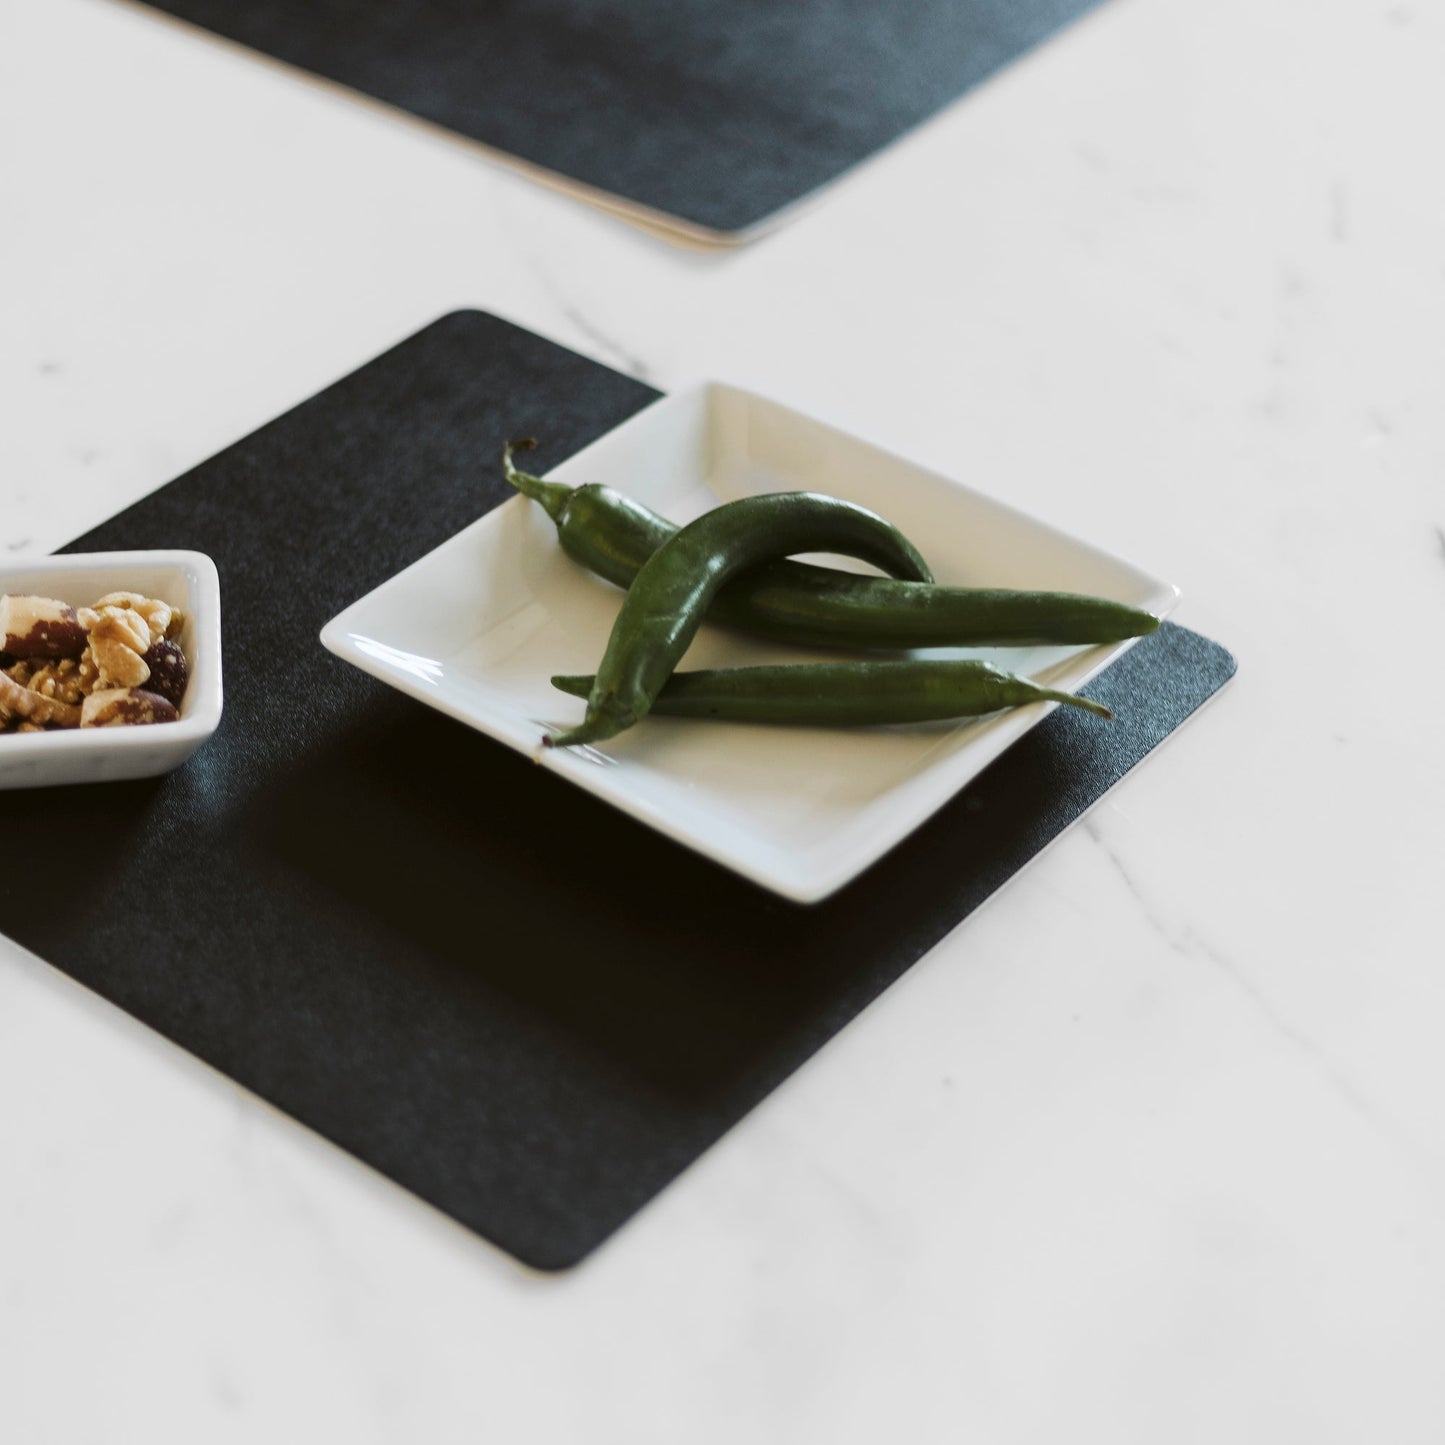 A black square washable paper placemat sits atop a white table. On top of it is a small ceramic plate with green peppers, and a small ceramic plate containing nuts.